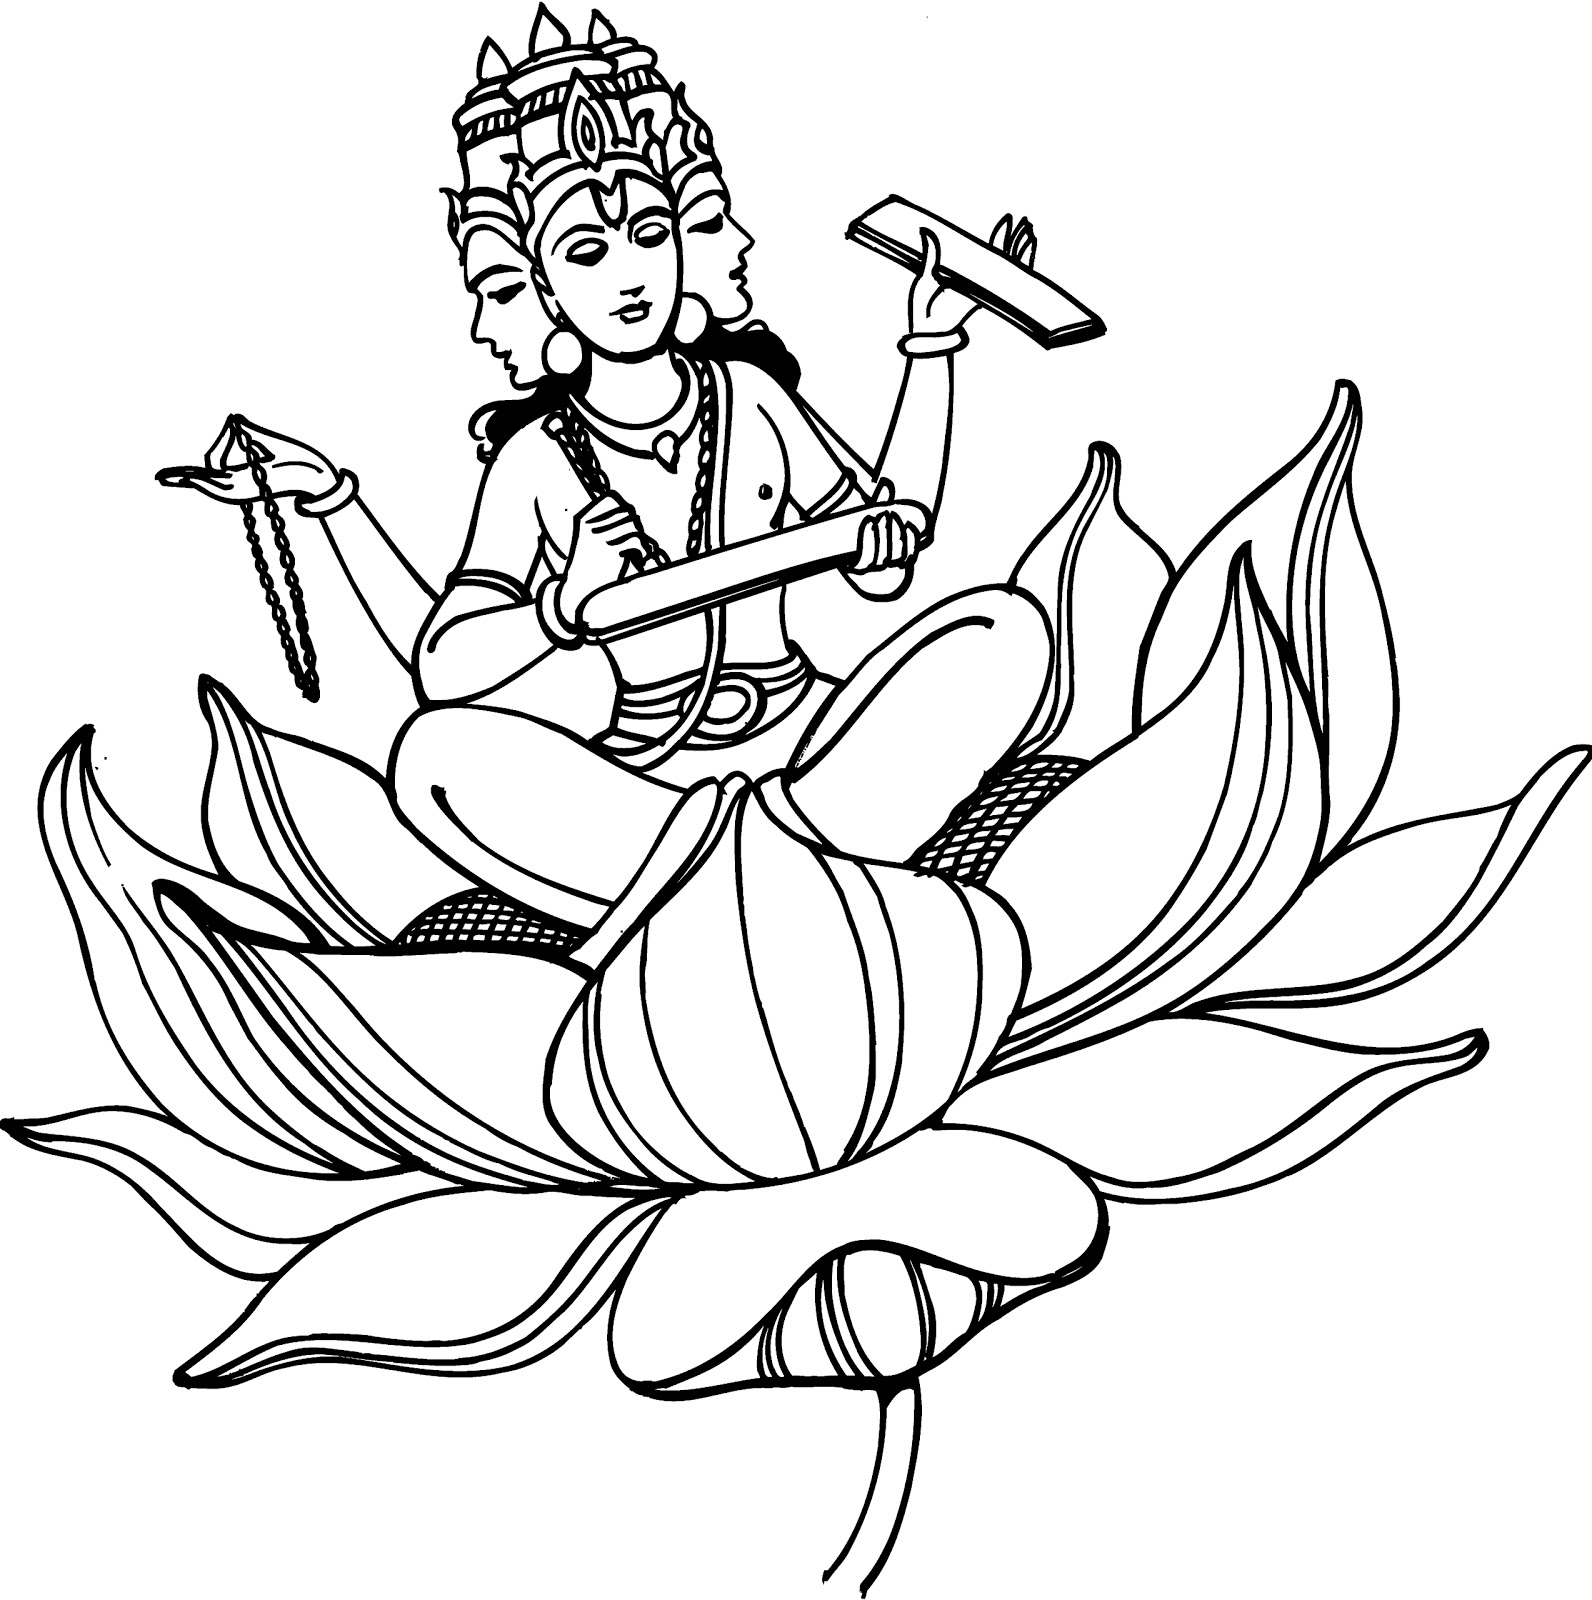 Coloring page: Hindu Mythology (Gods and Goddesses) #109234 - Free Printable Coloring Pages